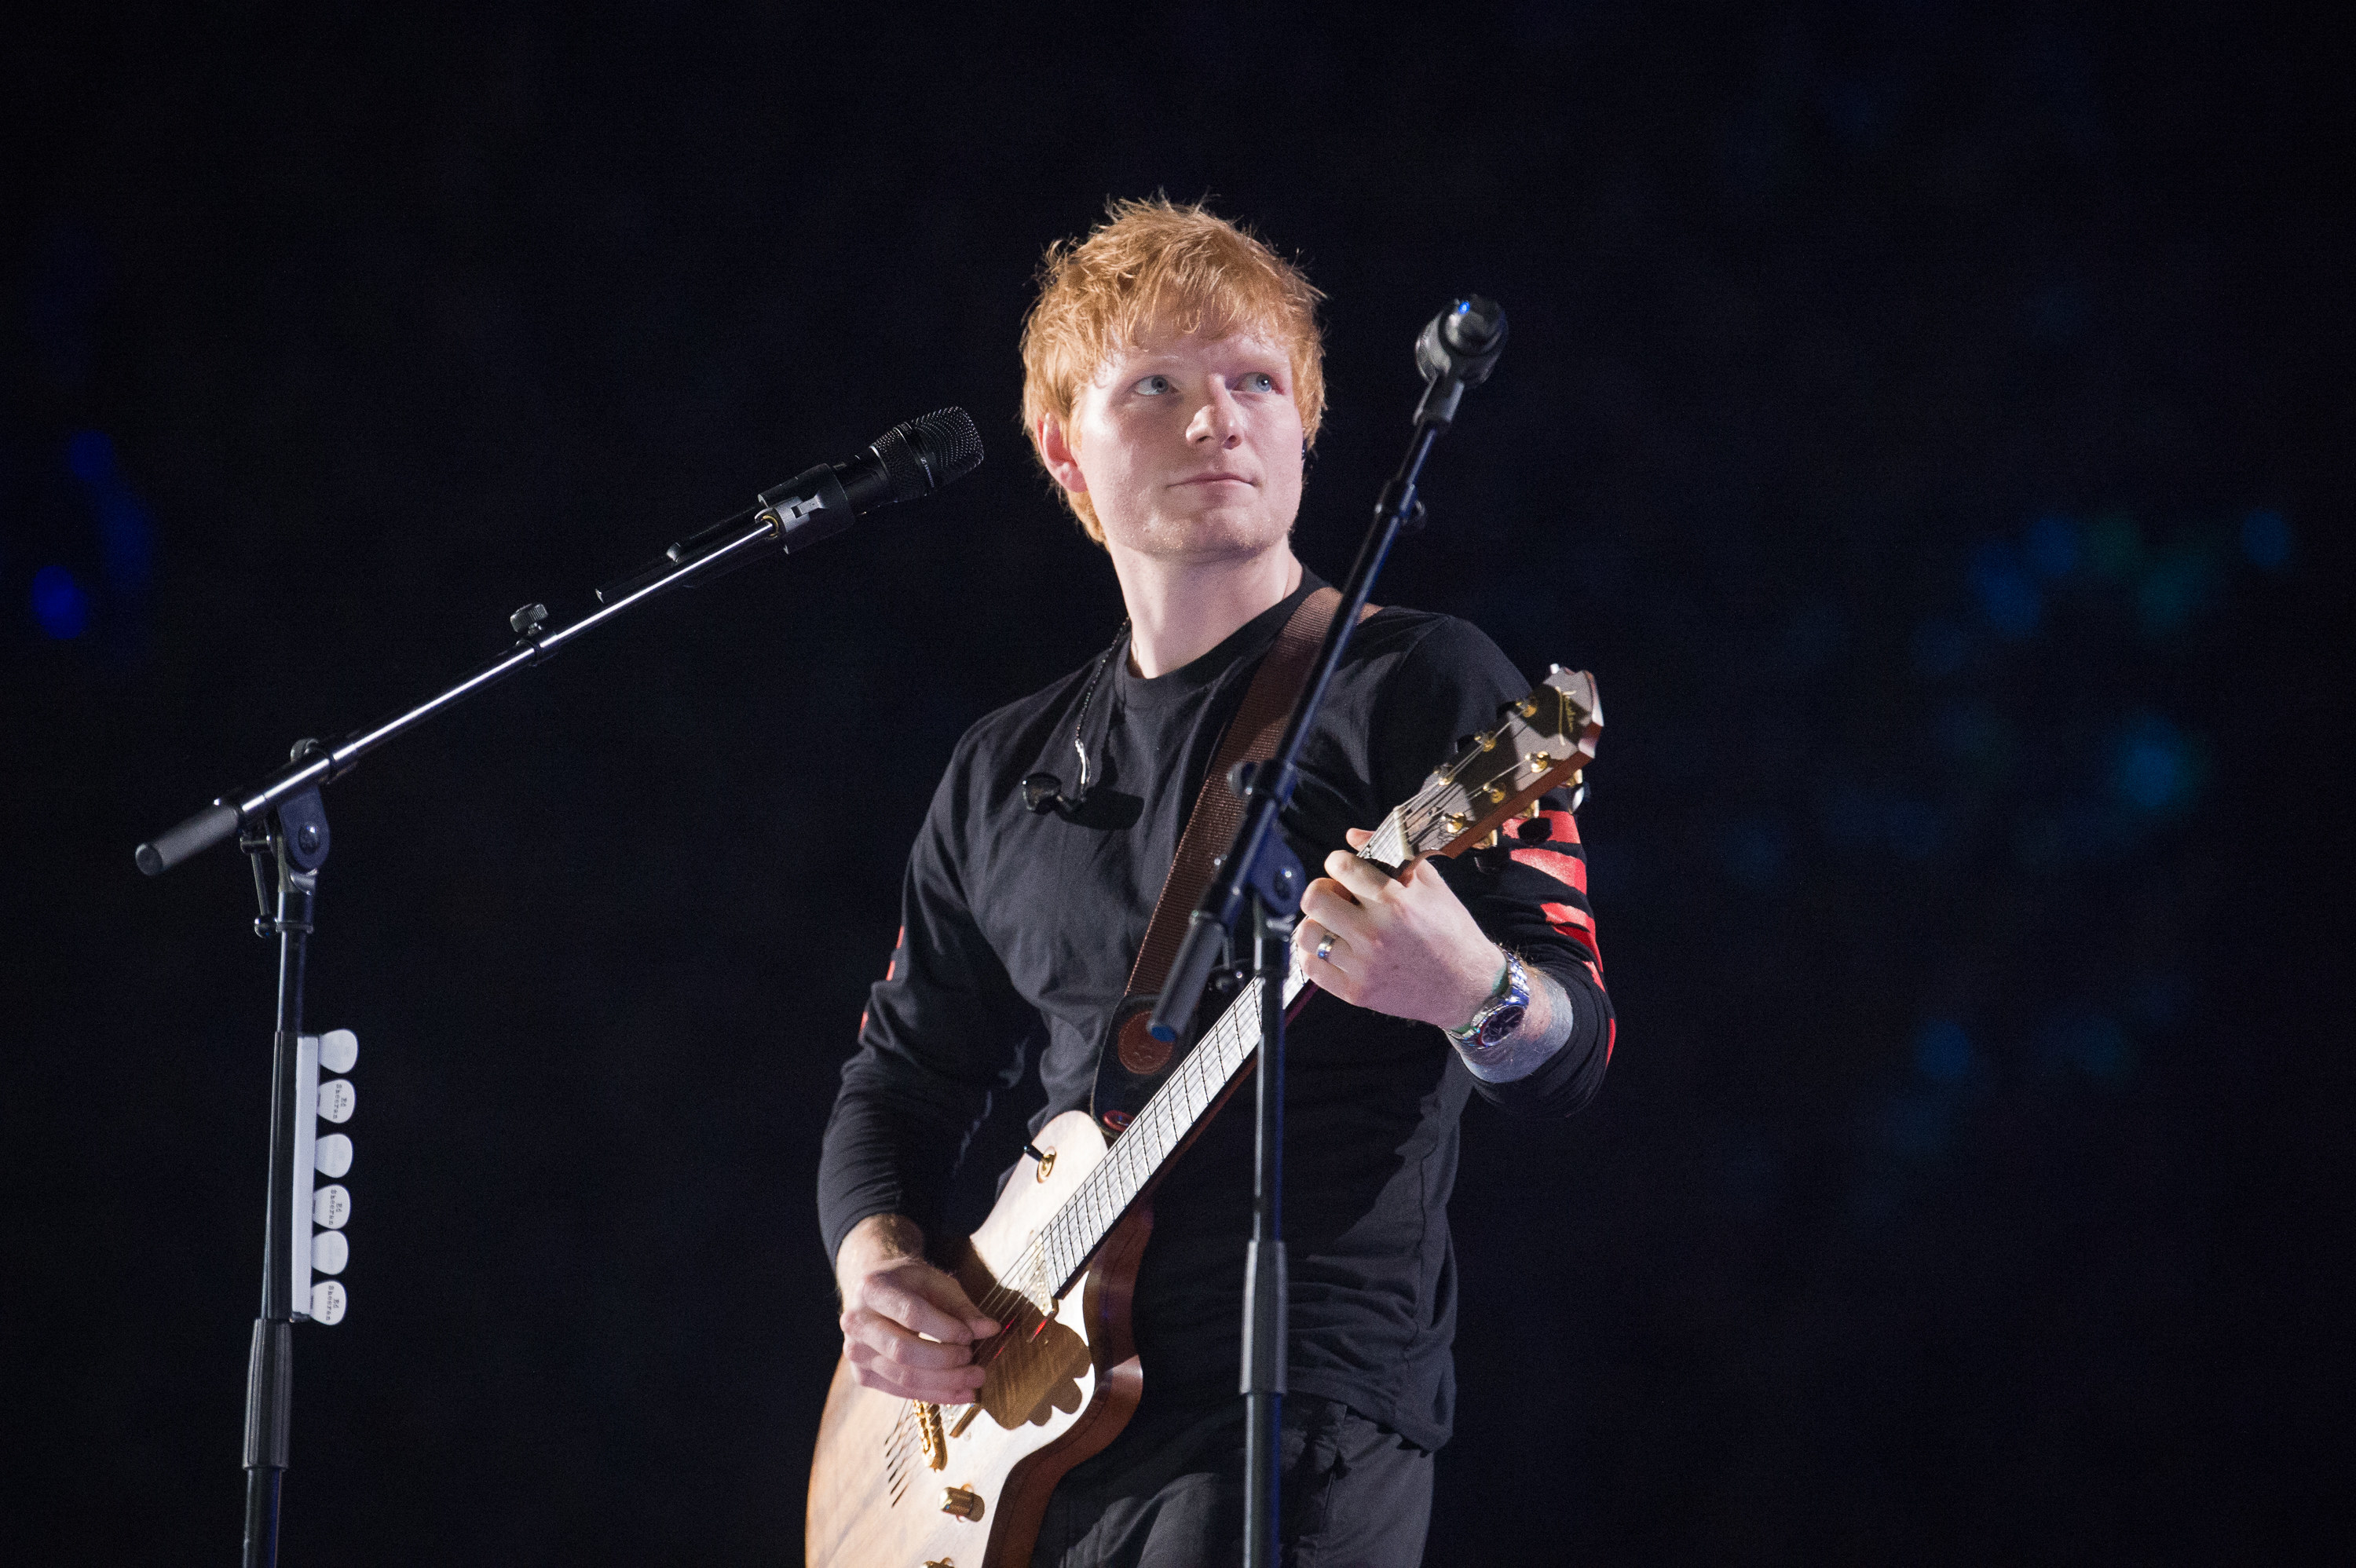 Sheeran looks off in the distance with a guitar in his hand onstage